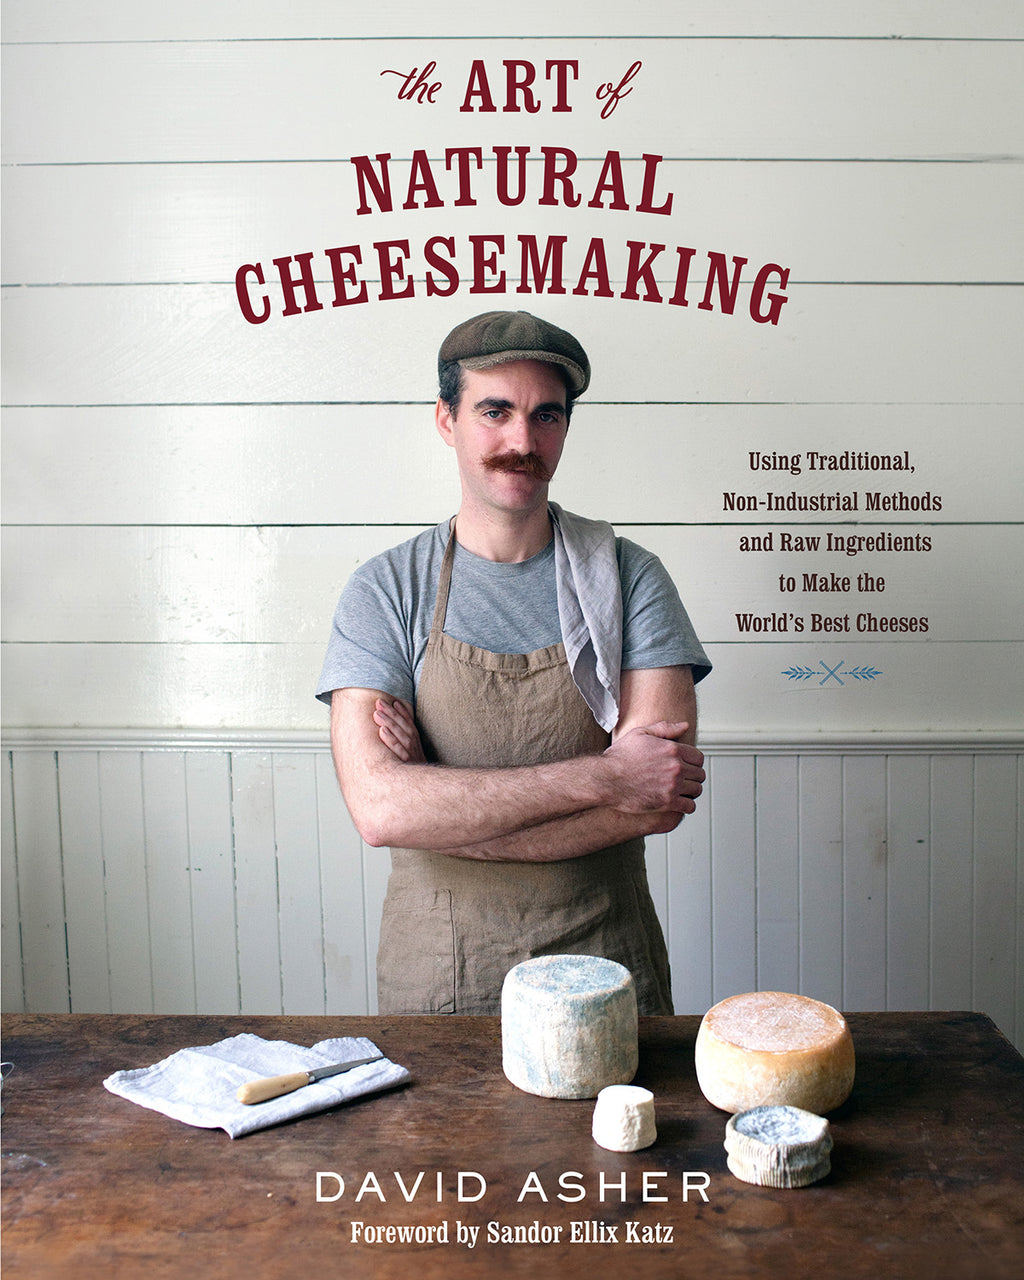 2-DAY NATURAL CHEESEMAKING CLASS WITH DAVID ASHER